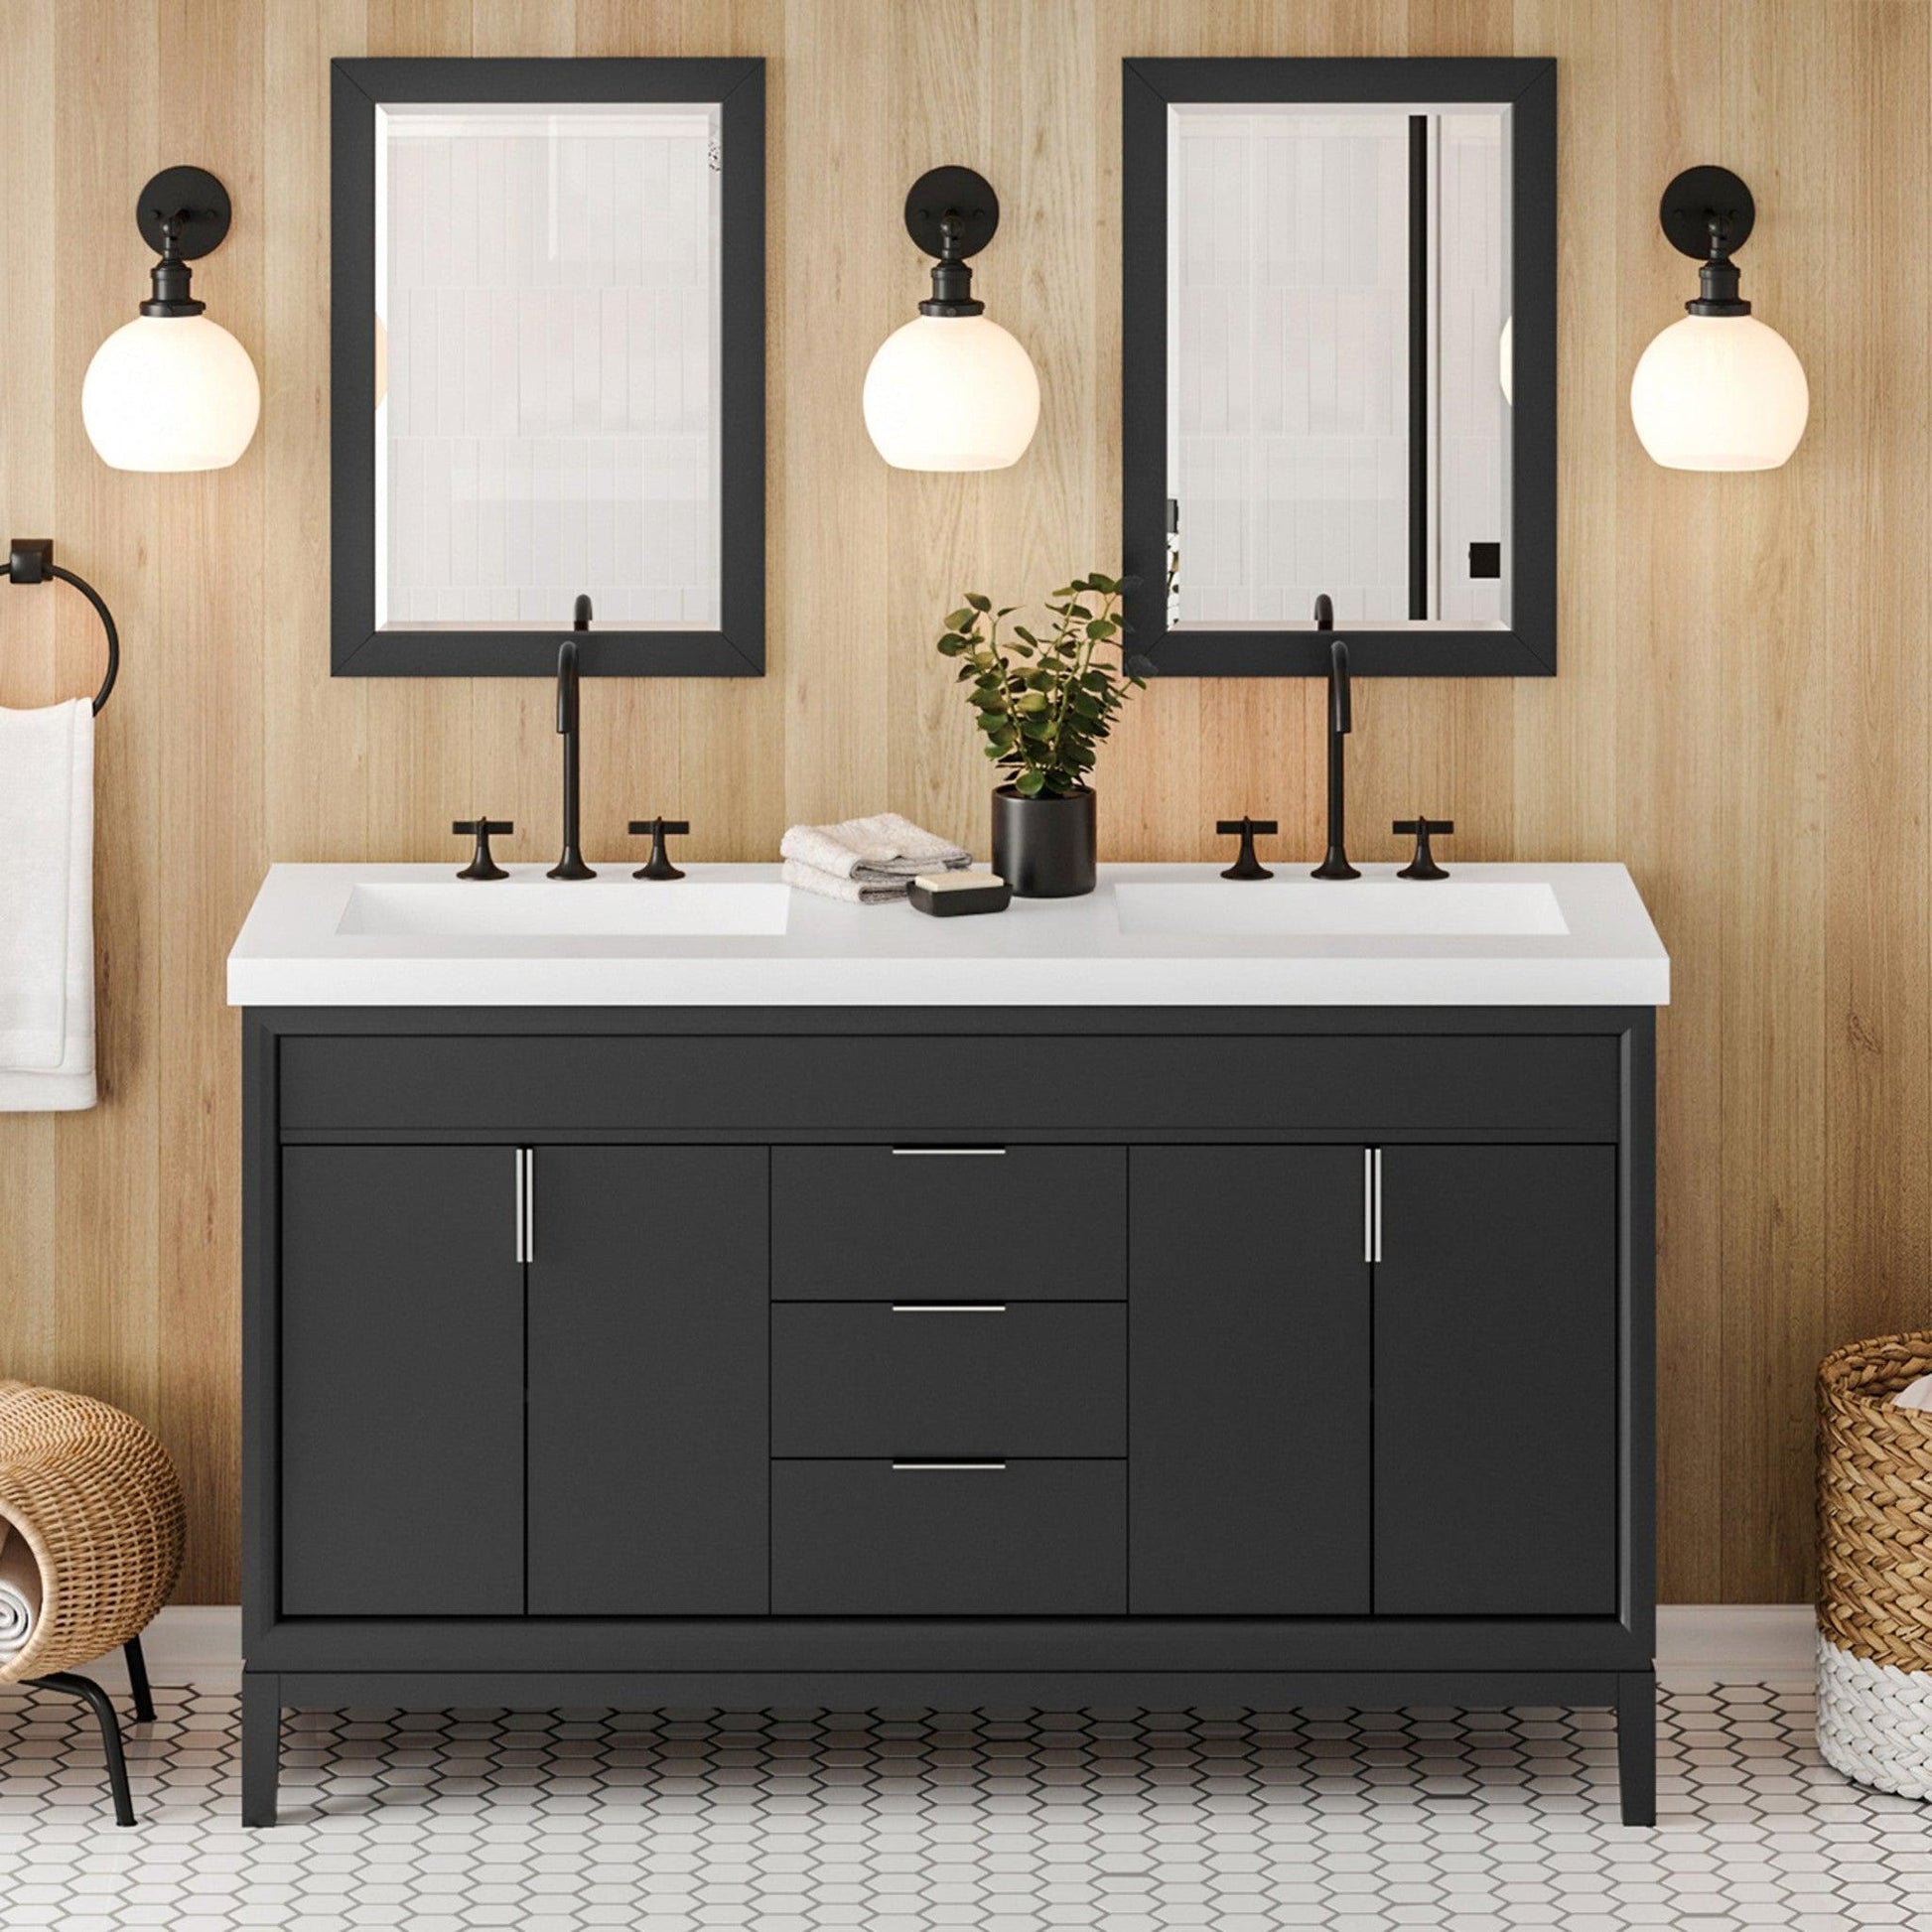 Custom Navy Blue bathroom Vanity with Brass Hardware - Transitional -  Bathroom - Los Angeles - by CC Furniture & Cabinetry